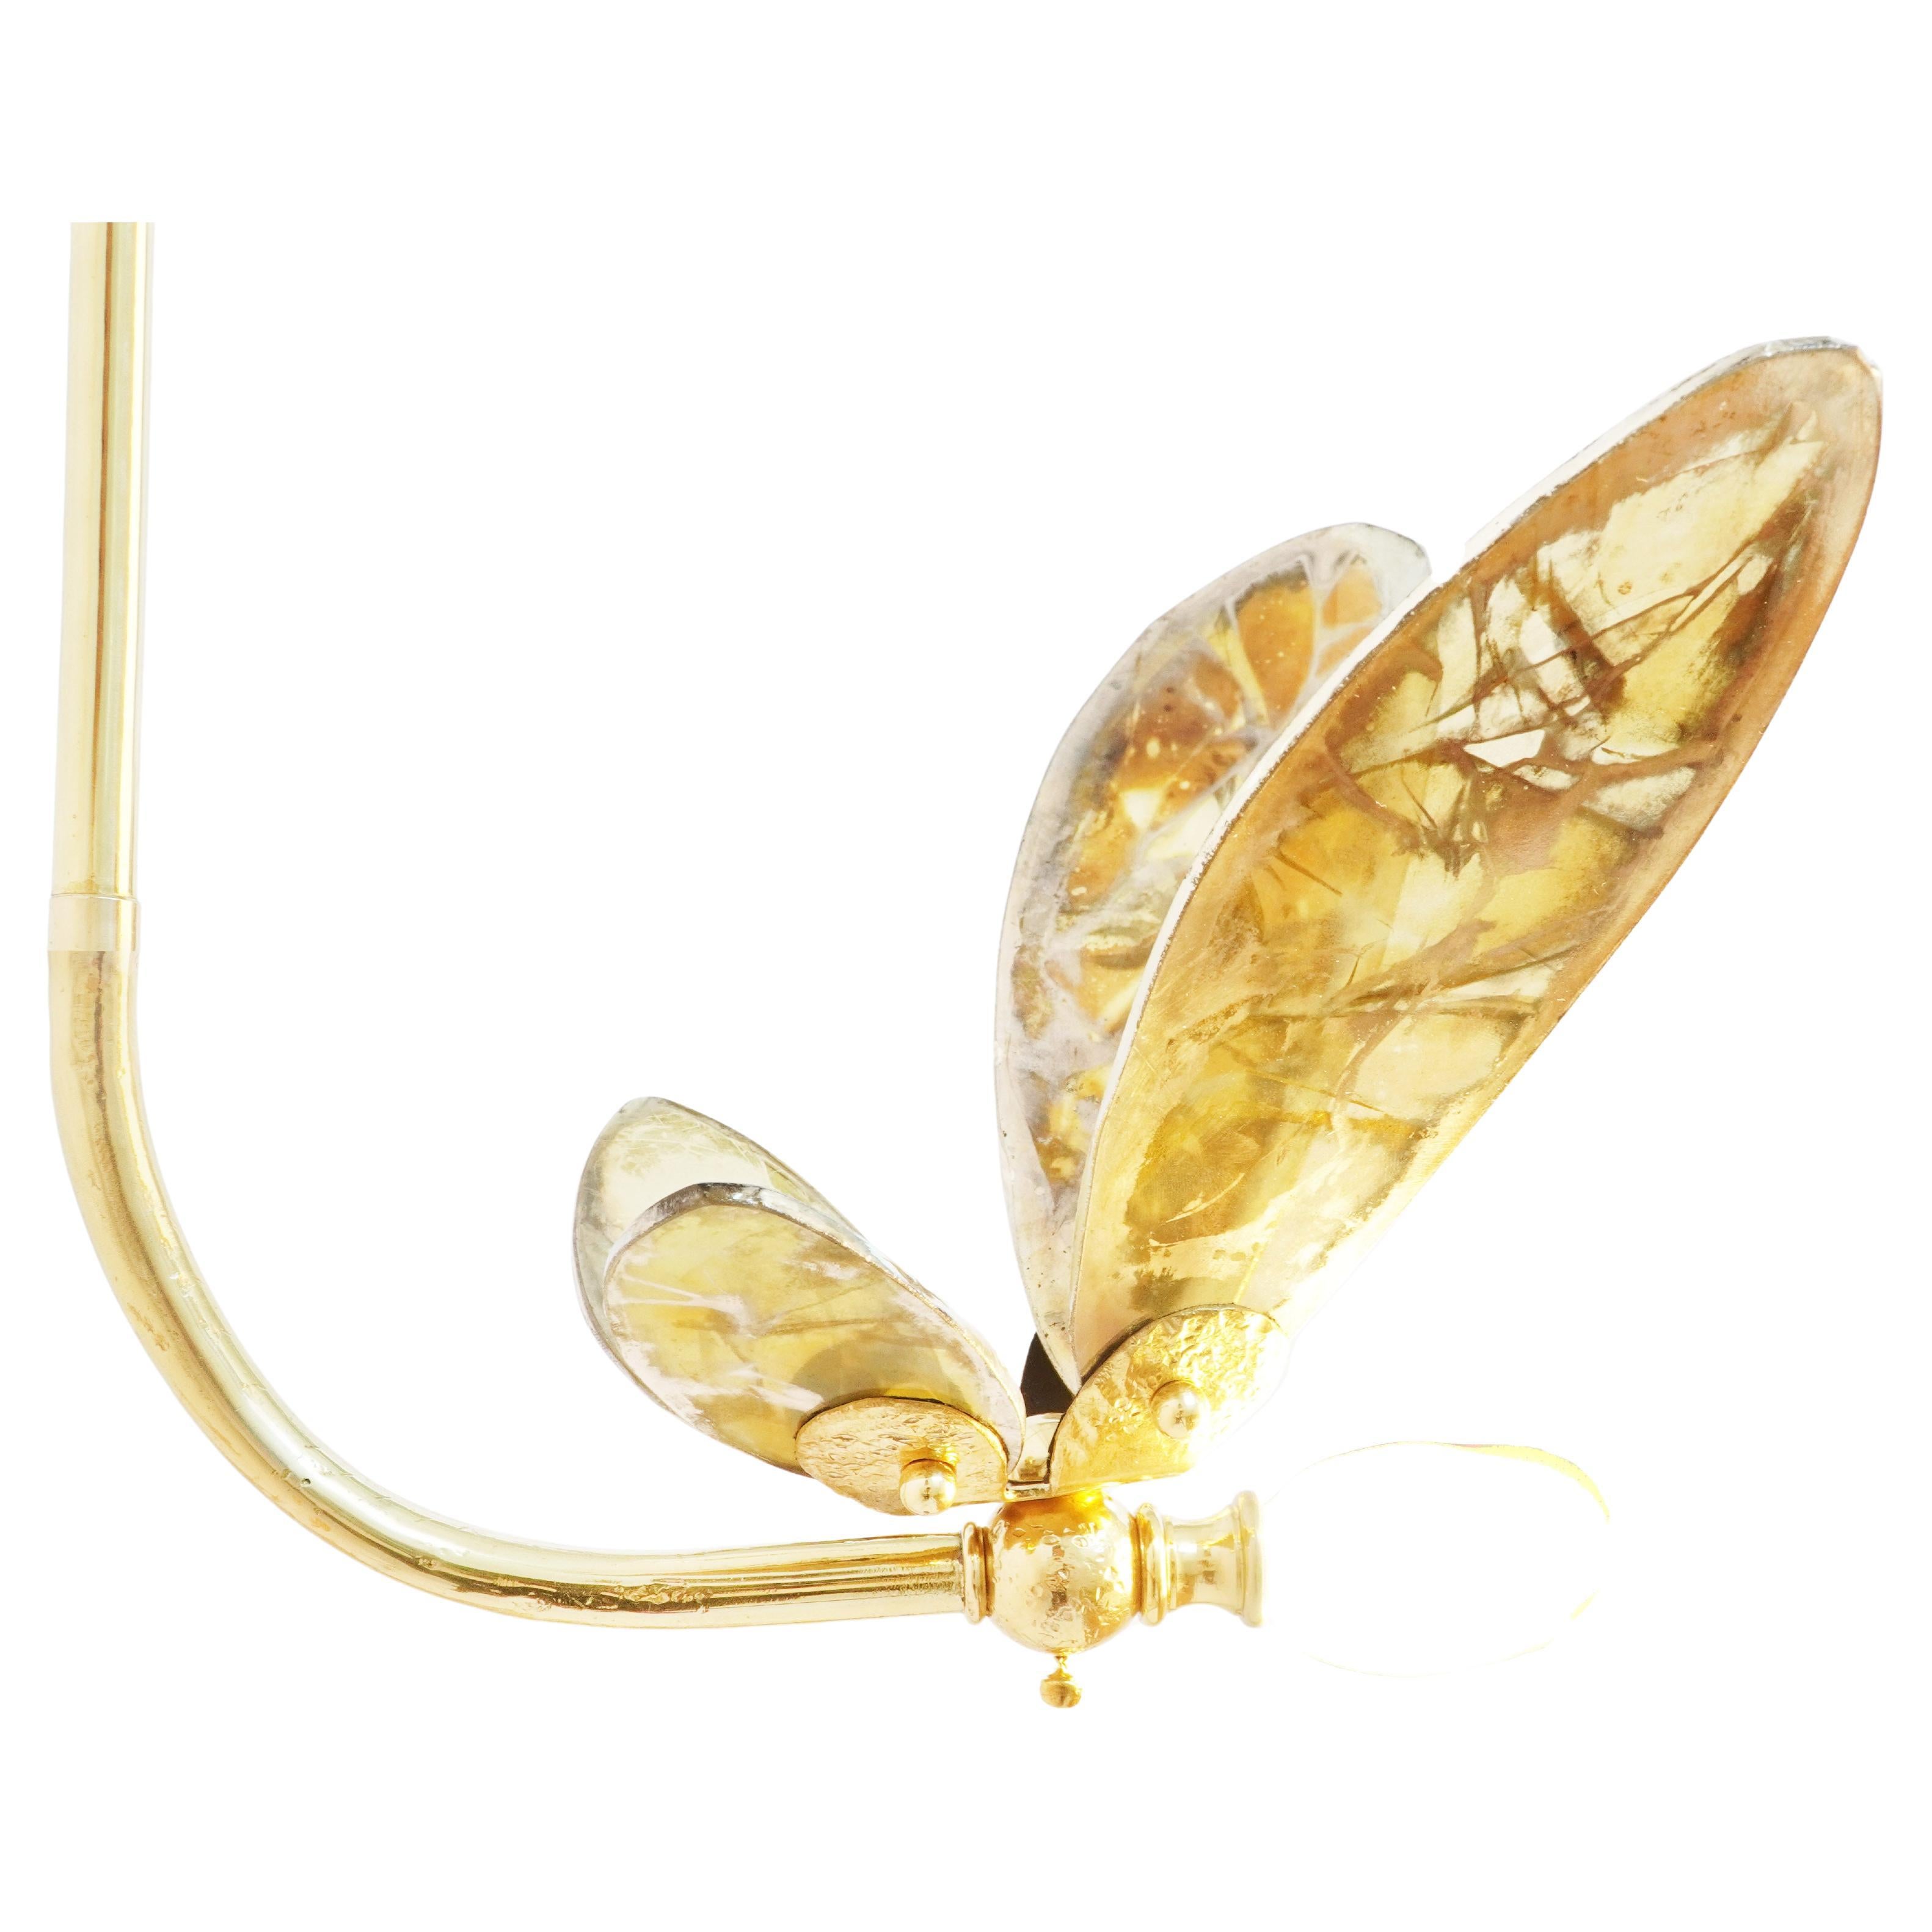 TRILLY the fairy wings of freedom

Small and sophisticated, the Trillies, enterely crafted in Italy, are the little sisters of our Butterfly models, they bring an ethereal allure to your home décor, thanks to their colored and silvered glass